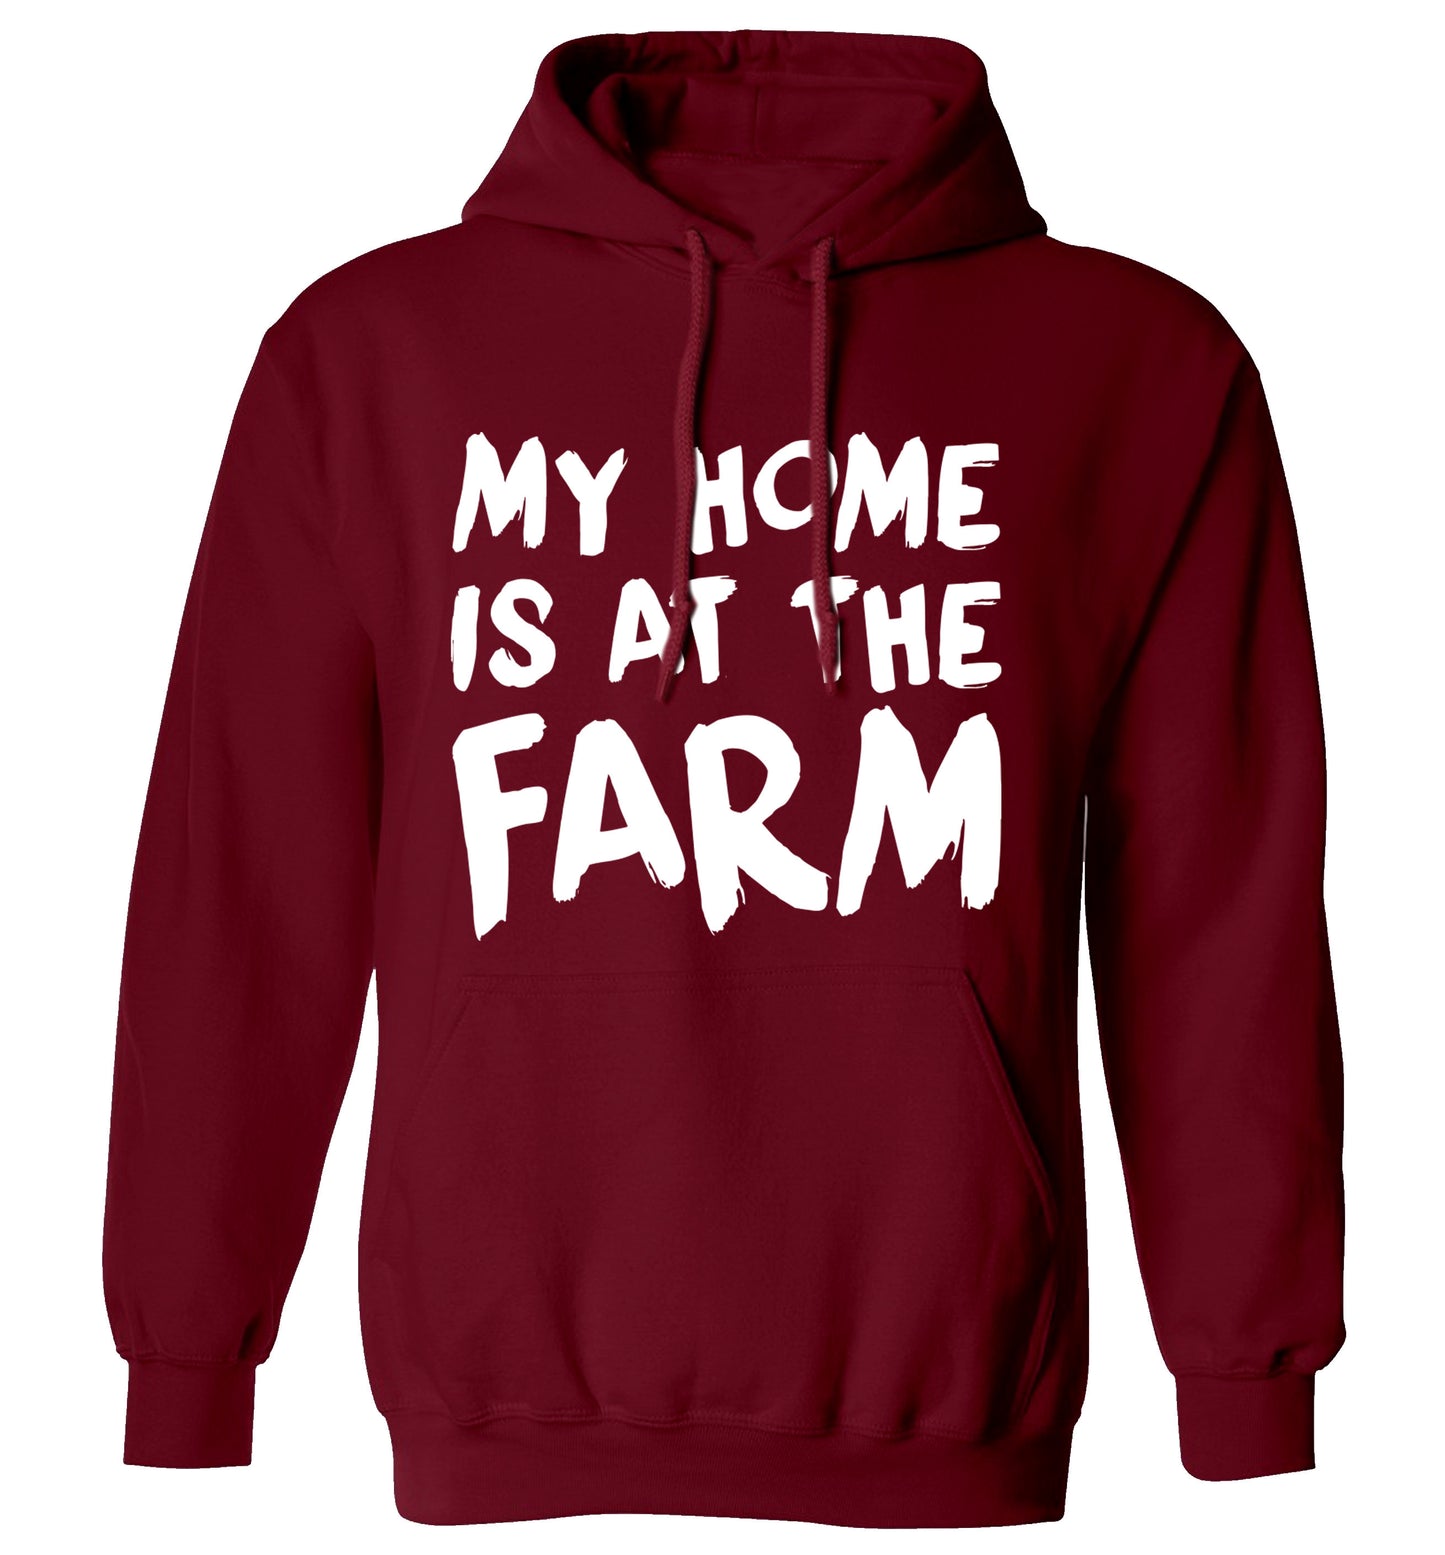 My home is at the farm adults unisex maroon hoodie 2XL